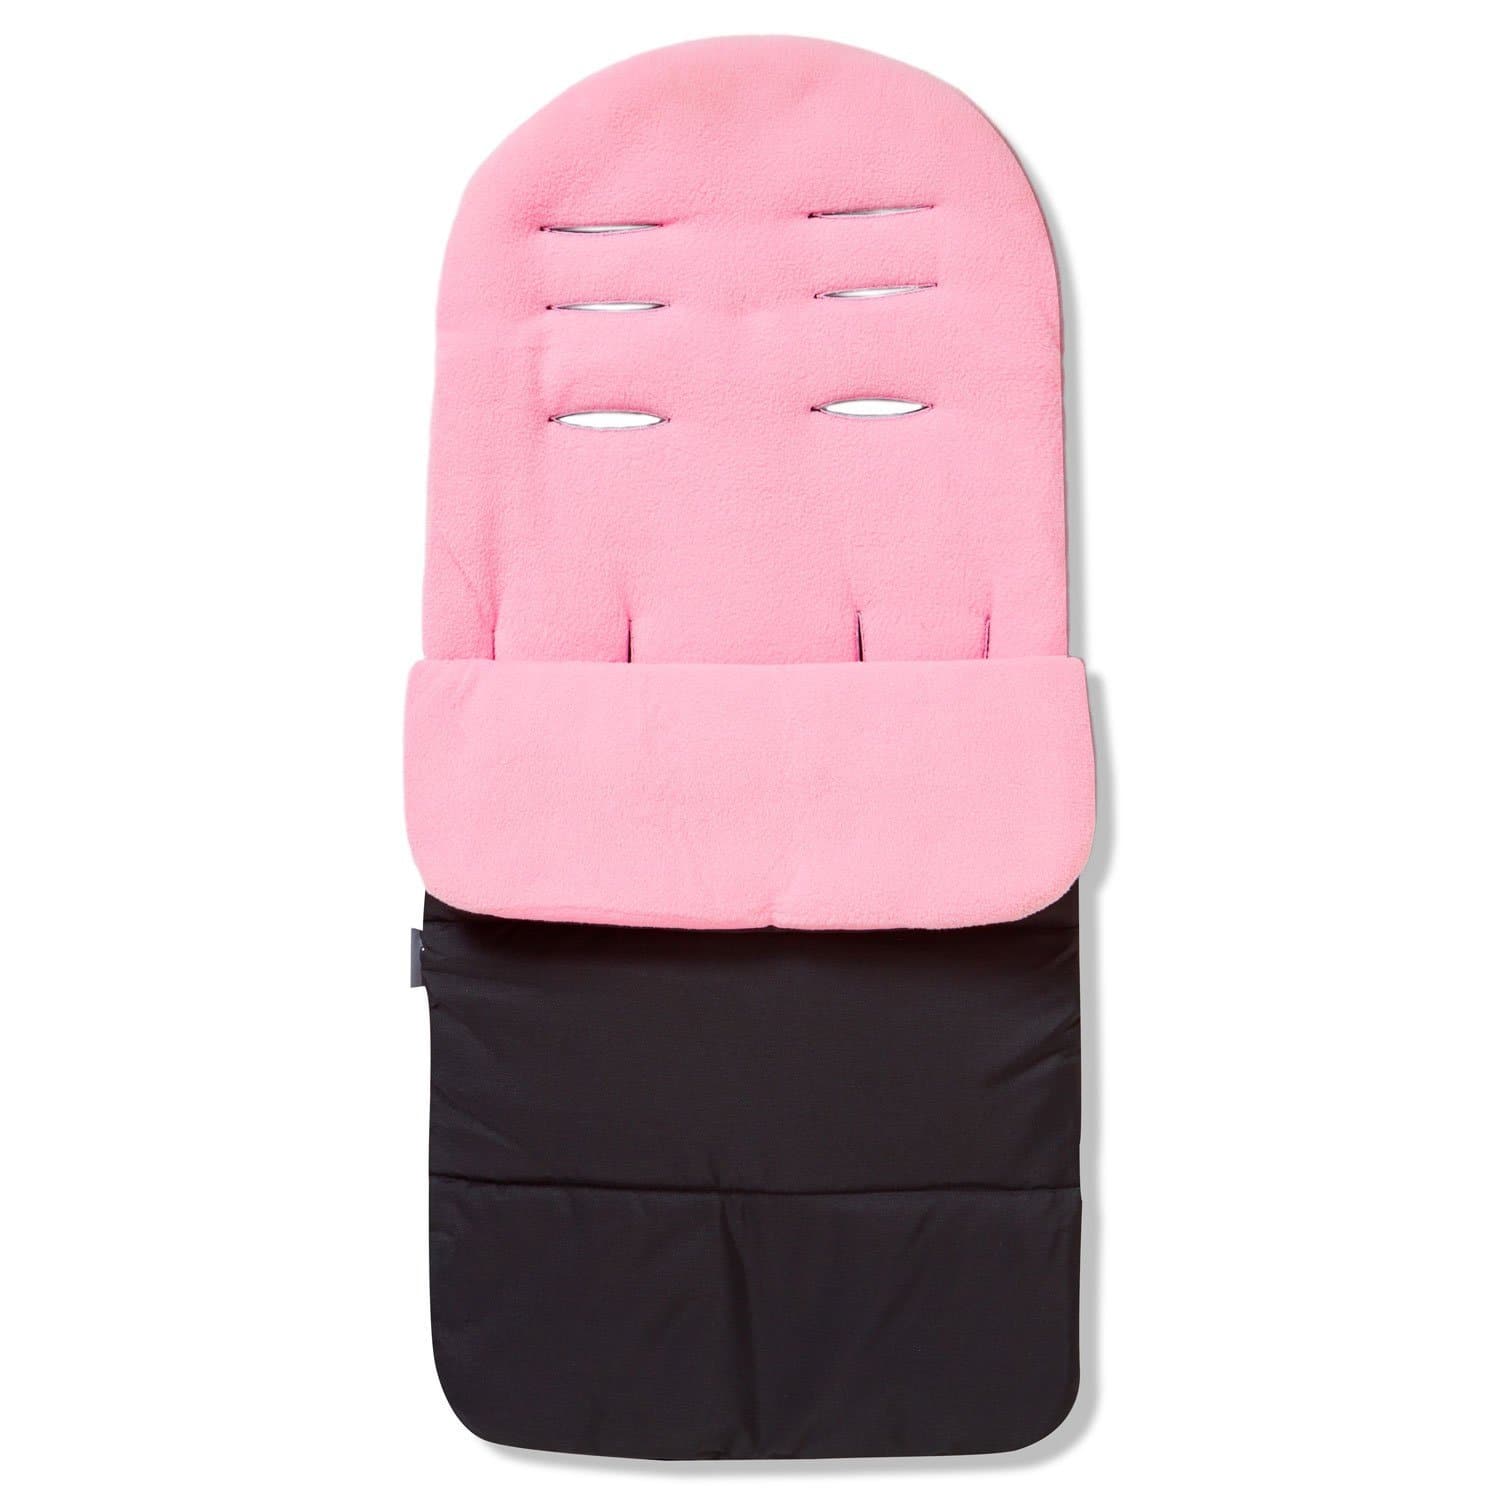 Premium Footmuff / Cosy Toes Compatible with Stokke - Candy Pink / Fits All Models | For Your Little One